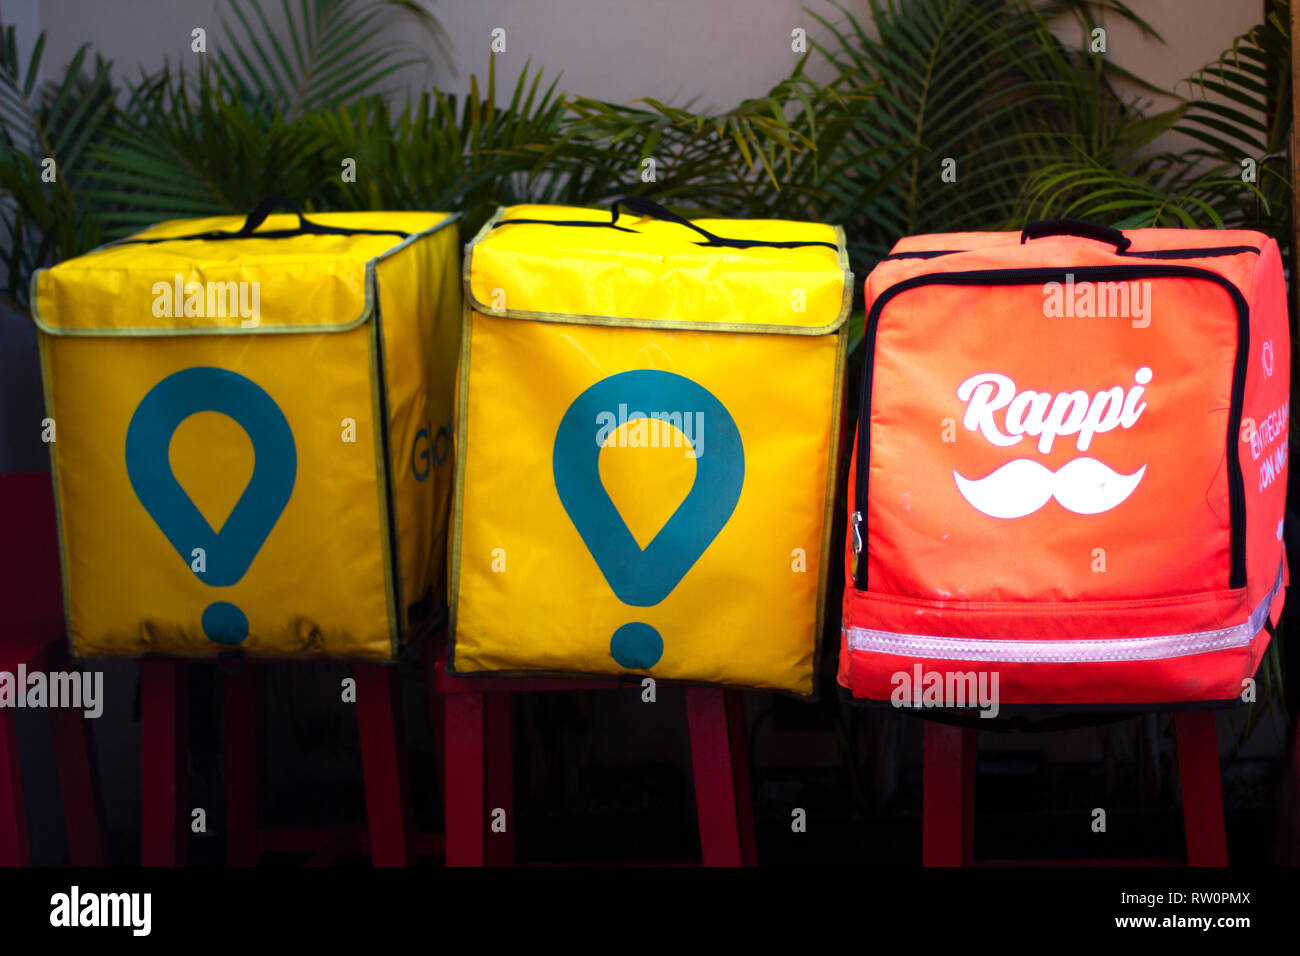 Lima, Peru - March 3 2019: Glovo and Rappi boxes outside a restaurant, food delivery service. Sharing economy concept. Stock Photo